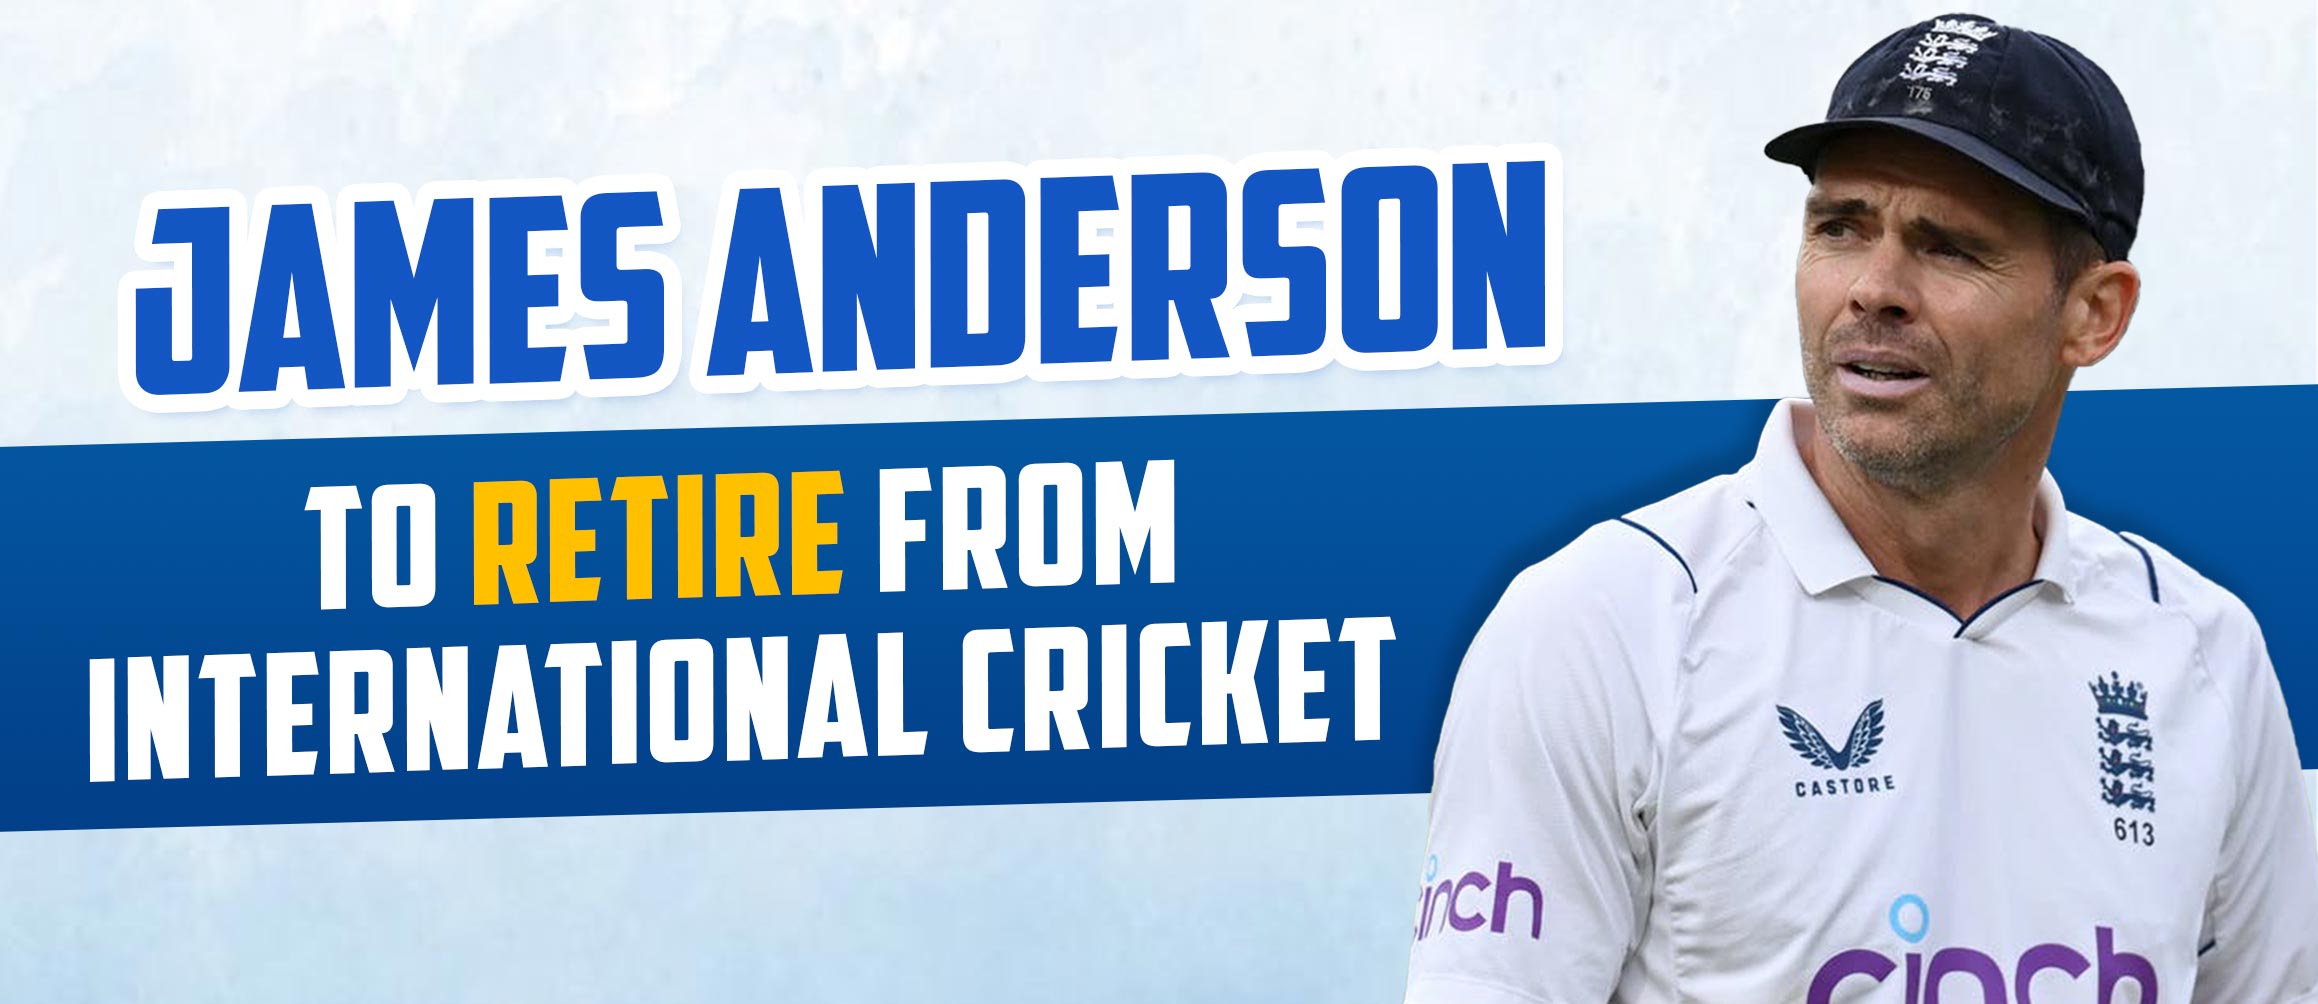 James Anderson to Retire from International Cricket